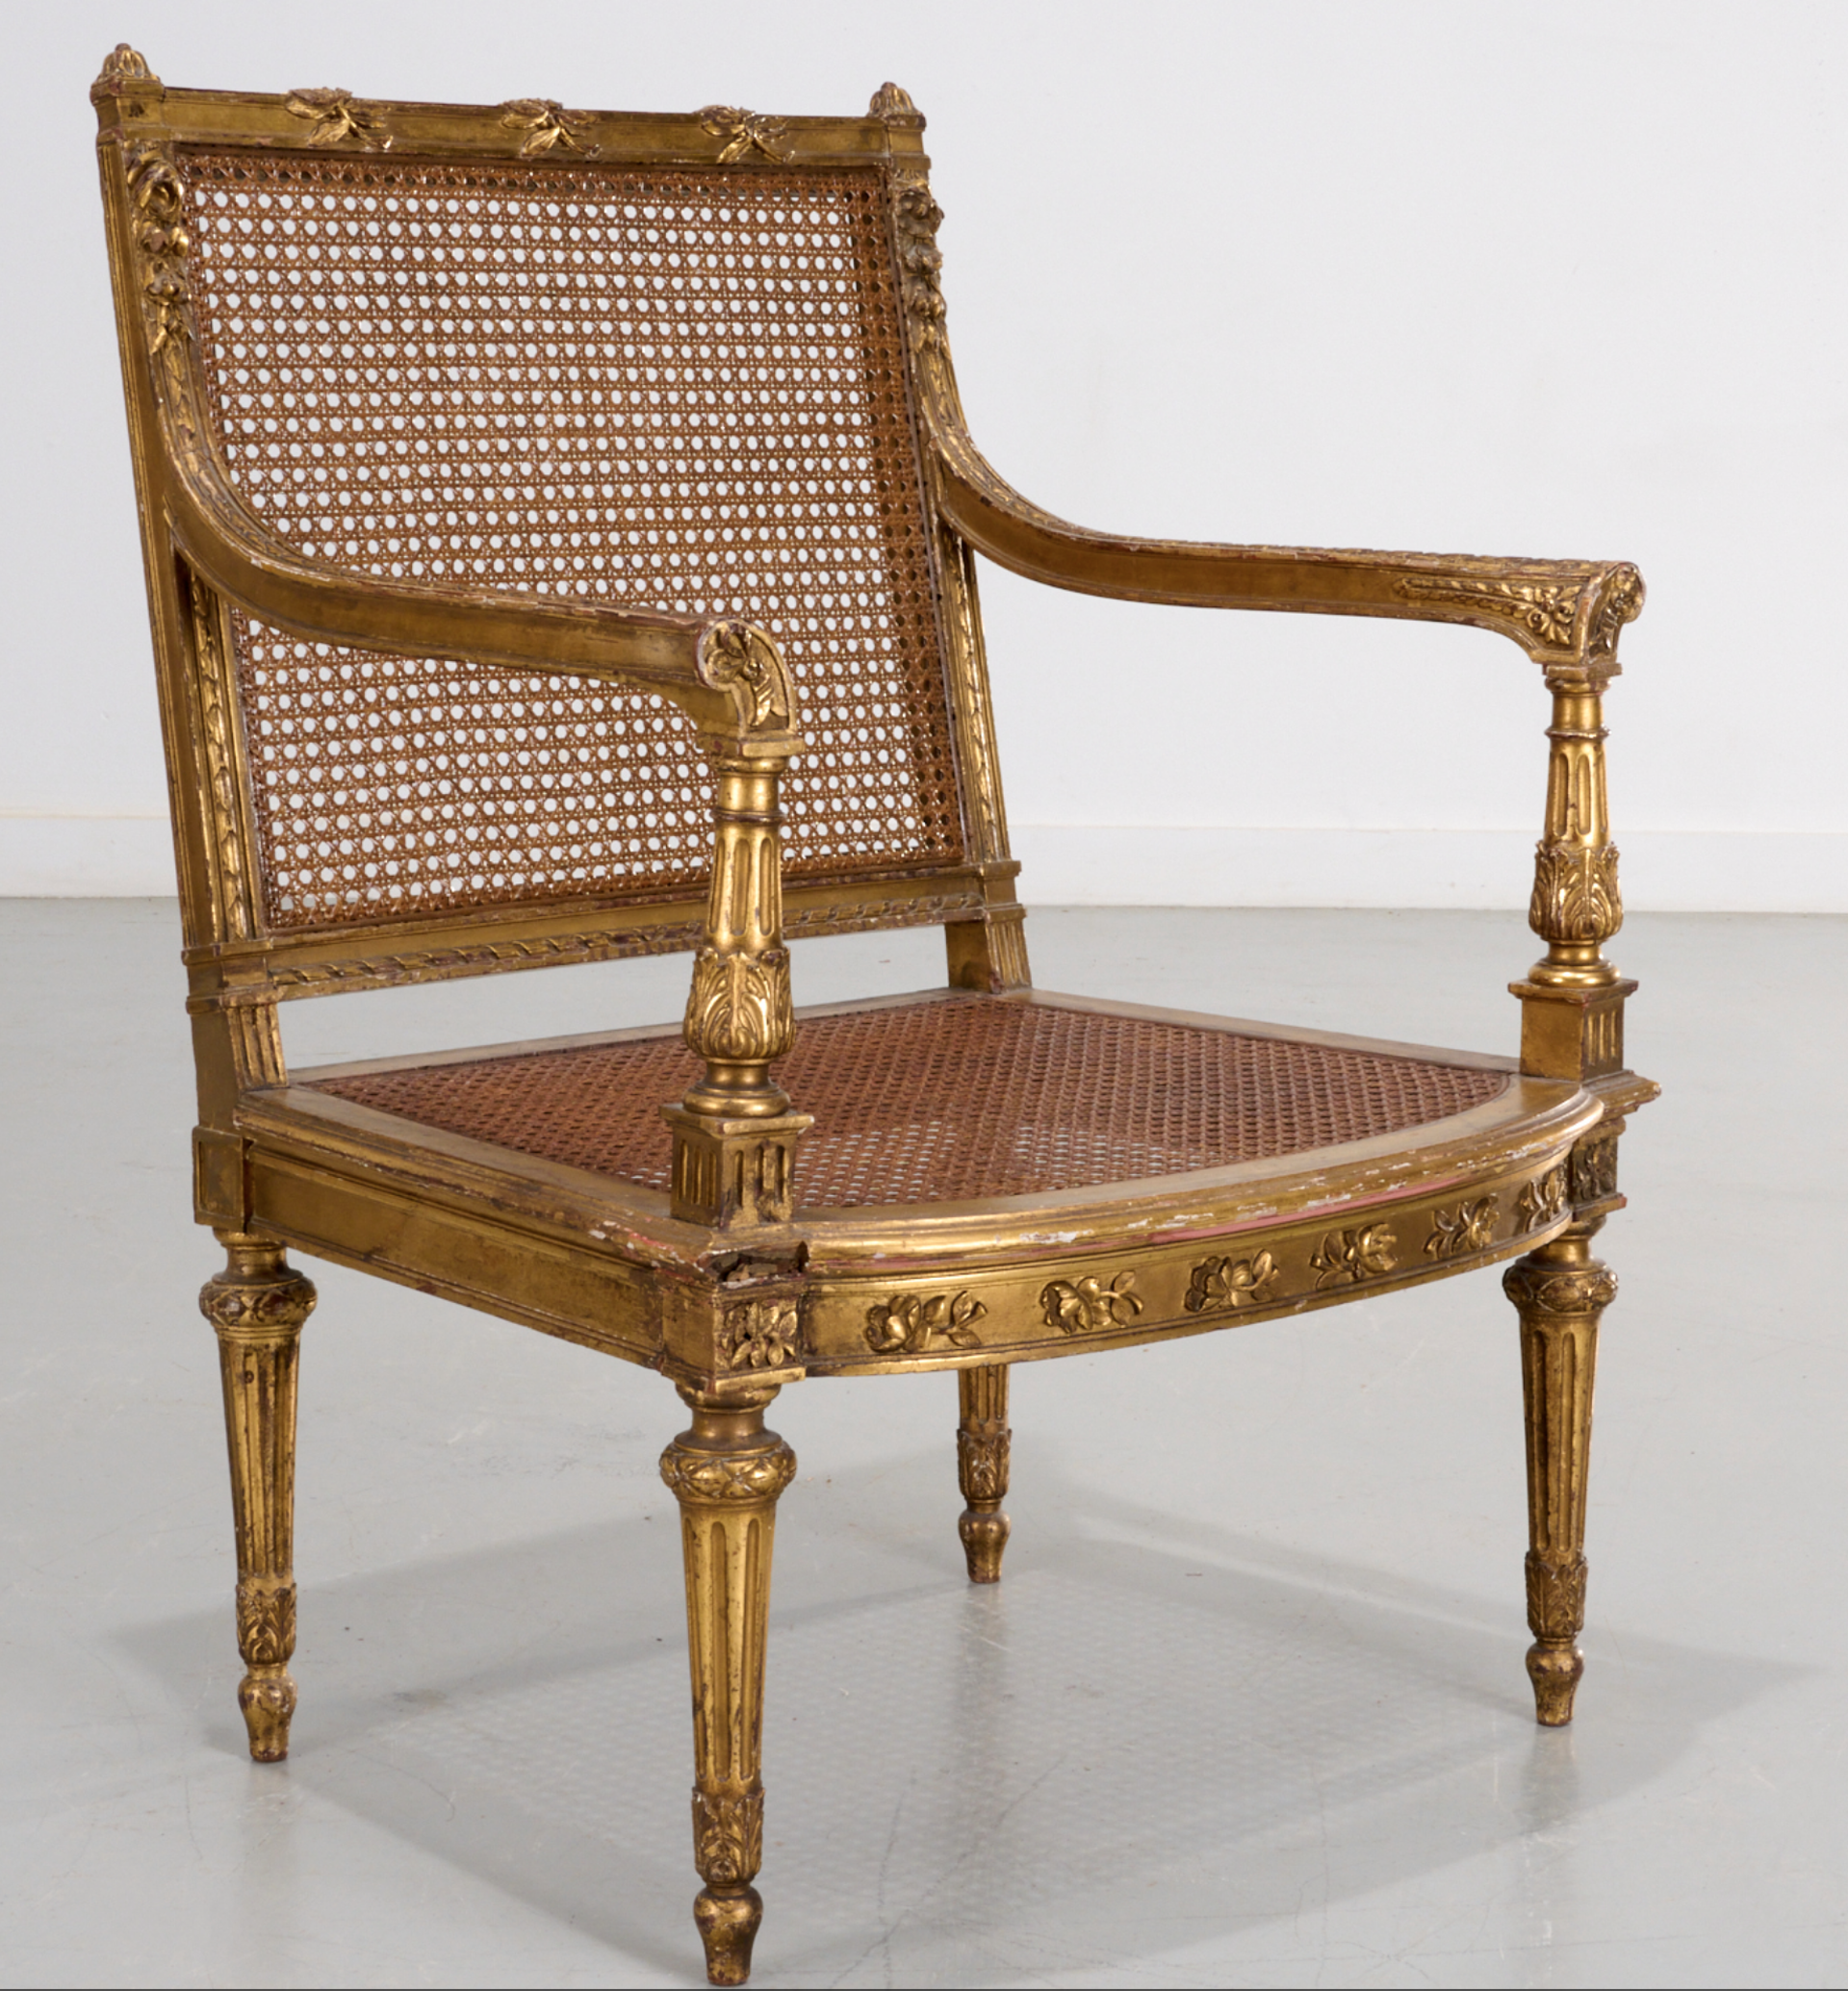 NAPOLEON III GILTWOOD FAUTEUIL WITH CANED SEAT AND BACK